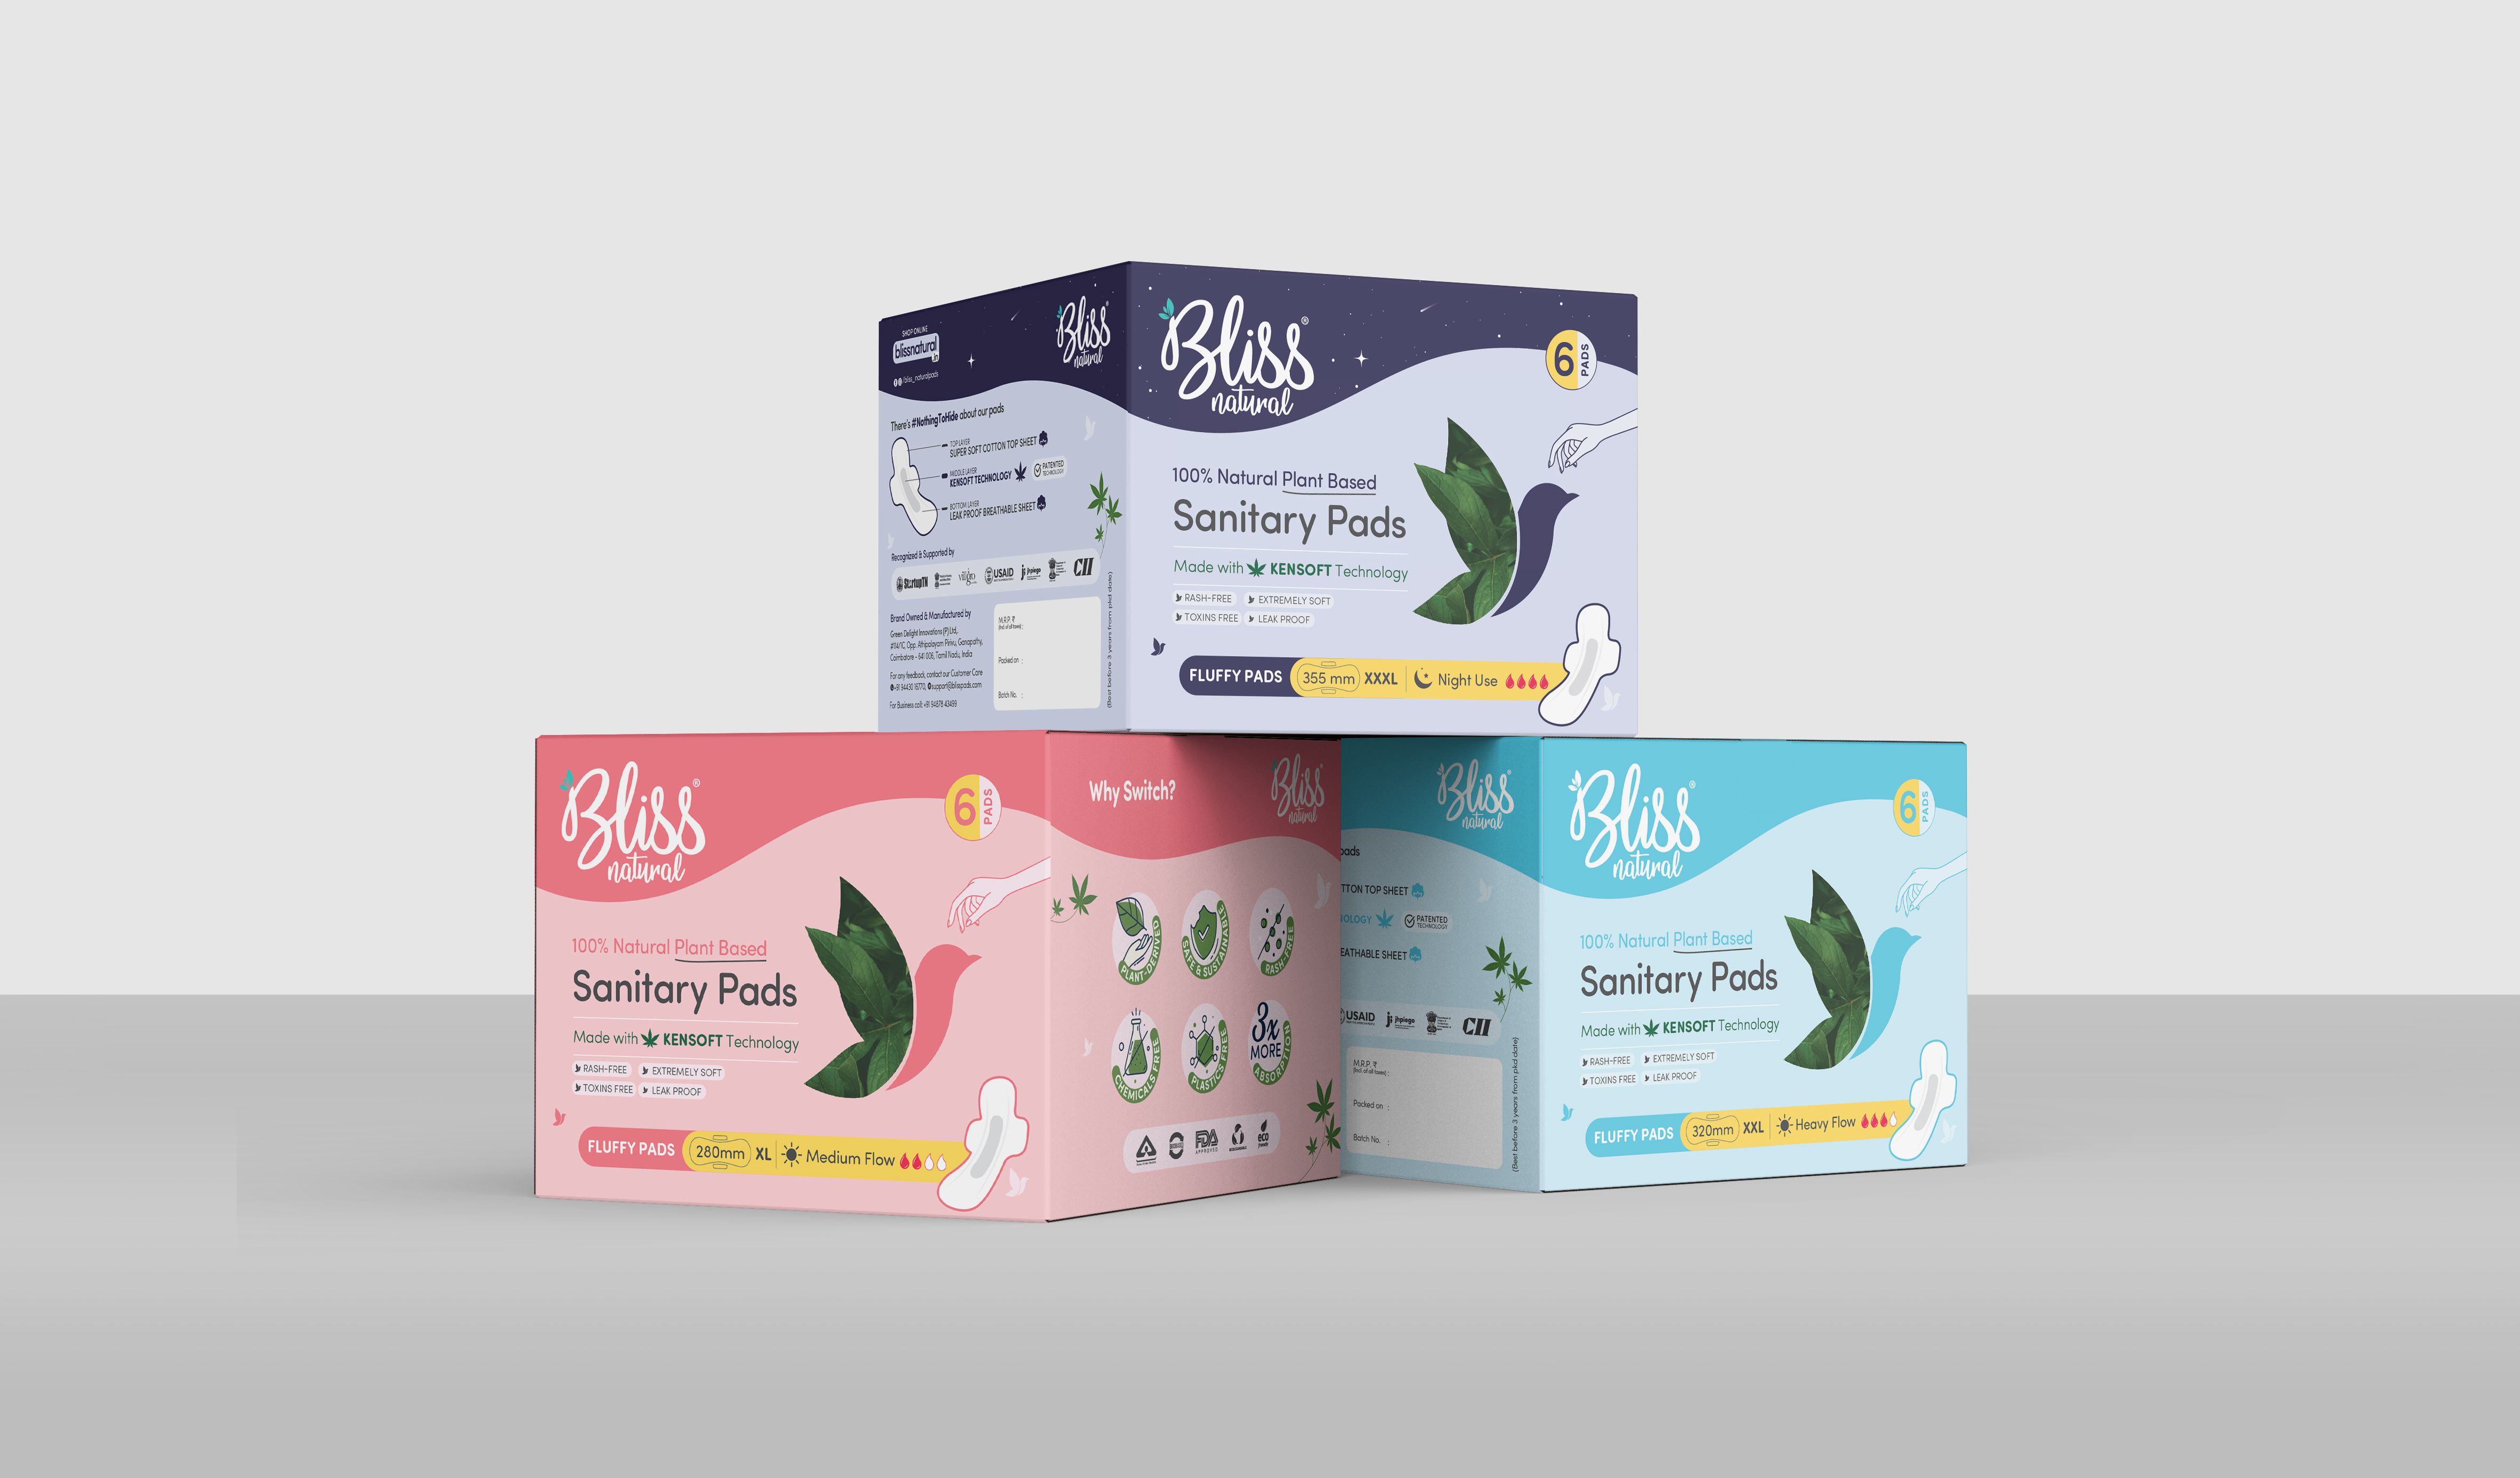 Plant-based Maternity Pads